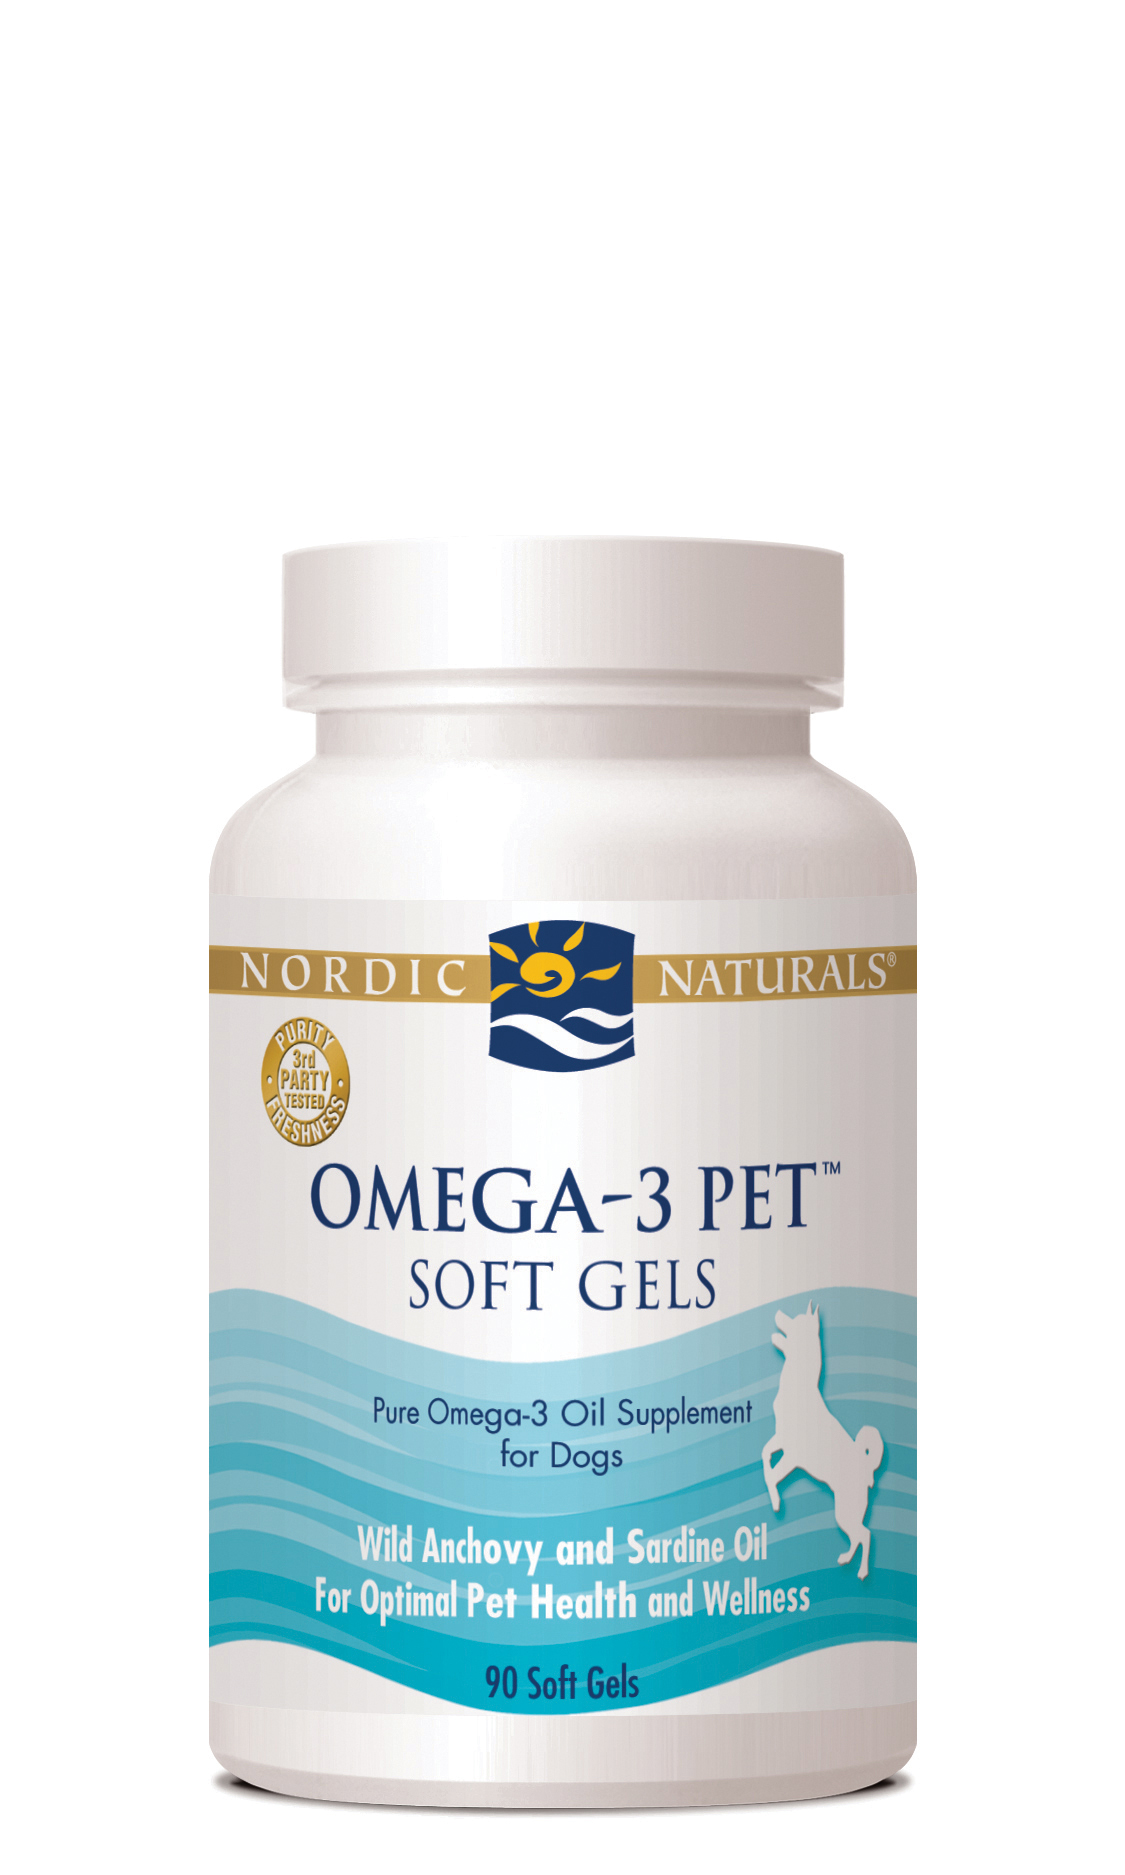 Omega-3 Pet by Nordic Naturals